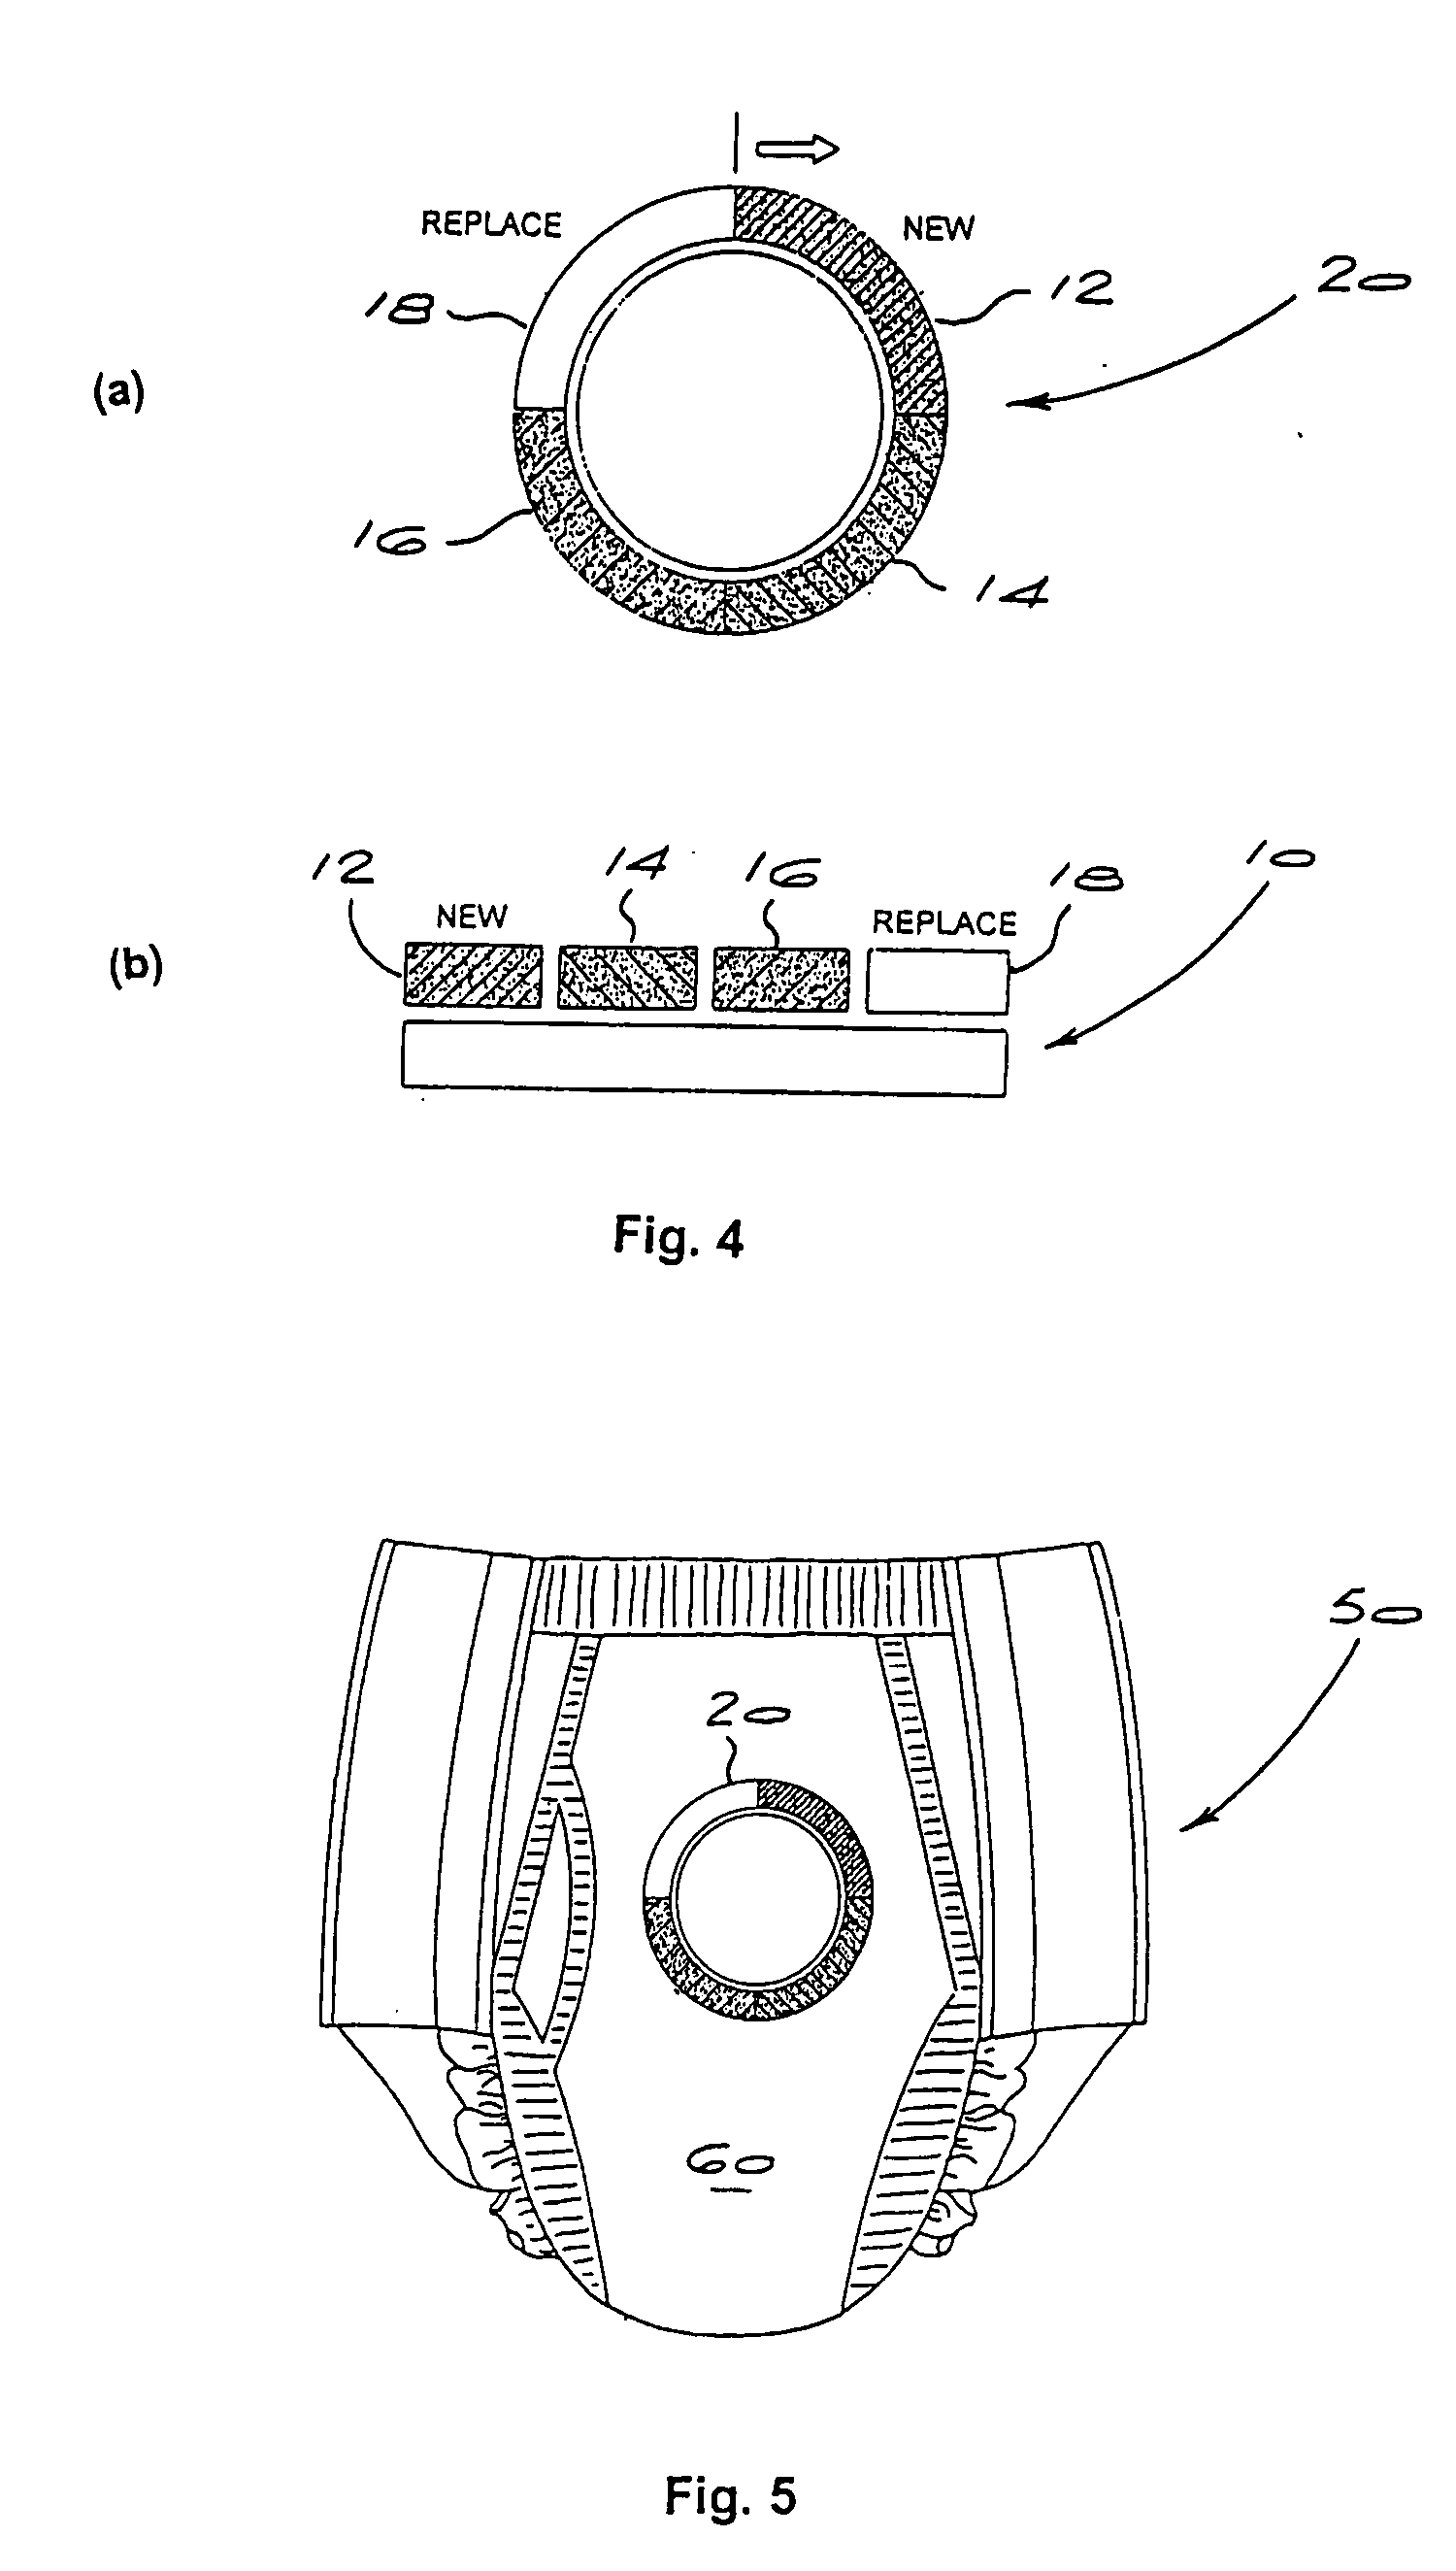 Odor controlling article including a visual indicating device for monitoring odor absorption